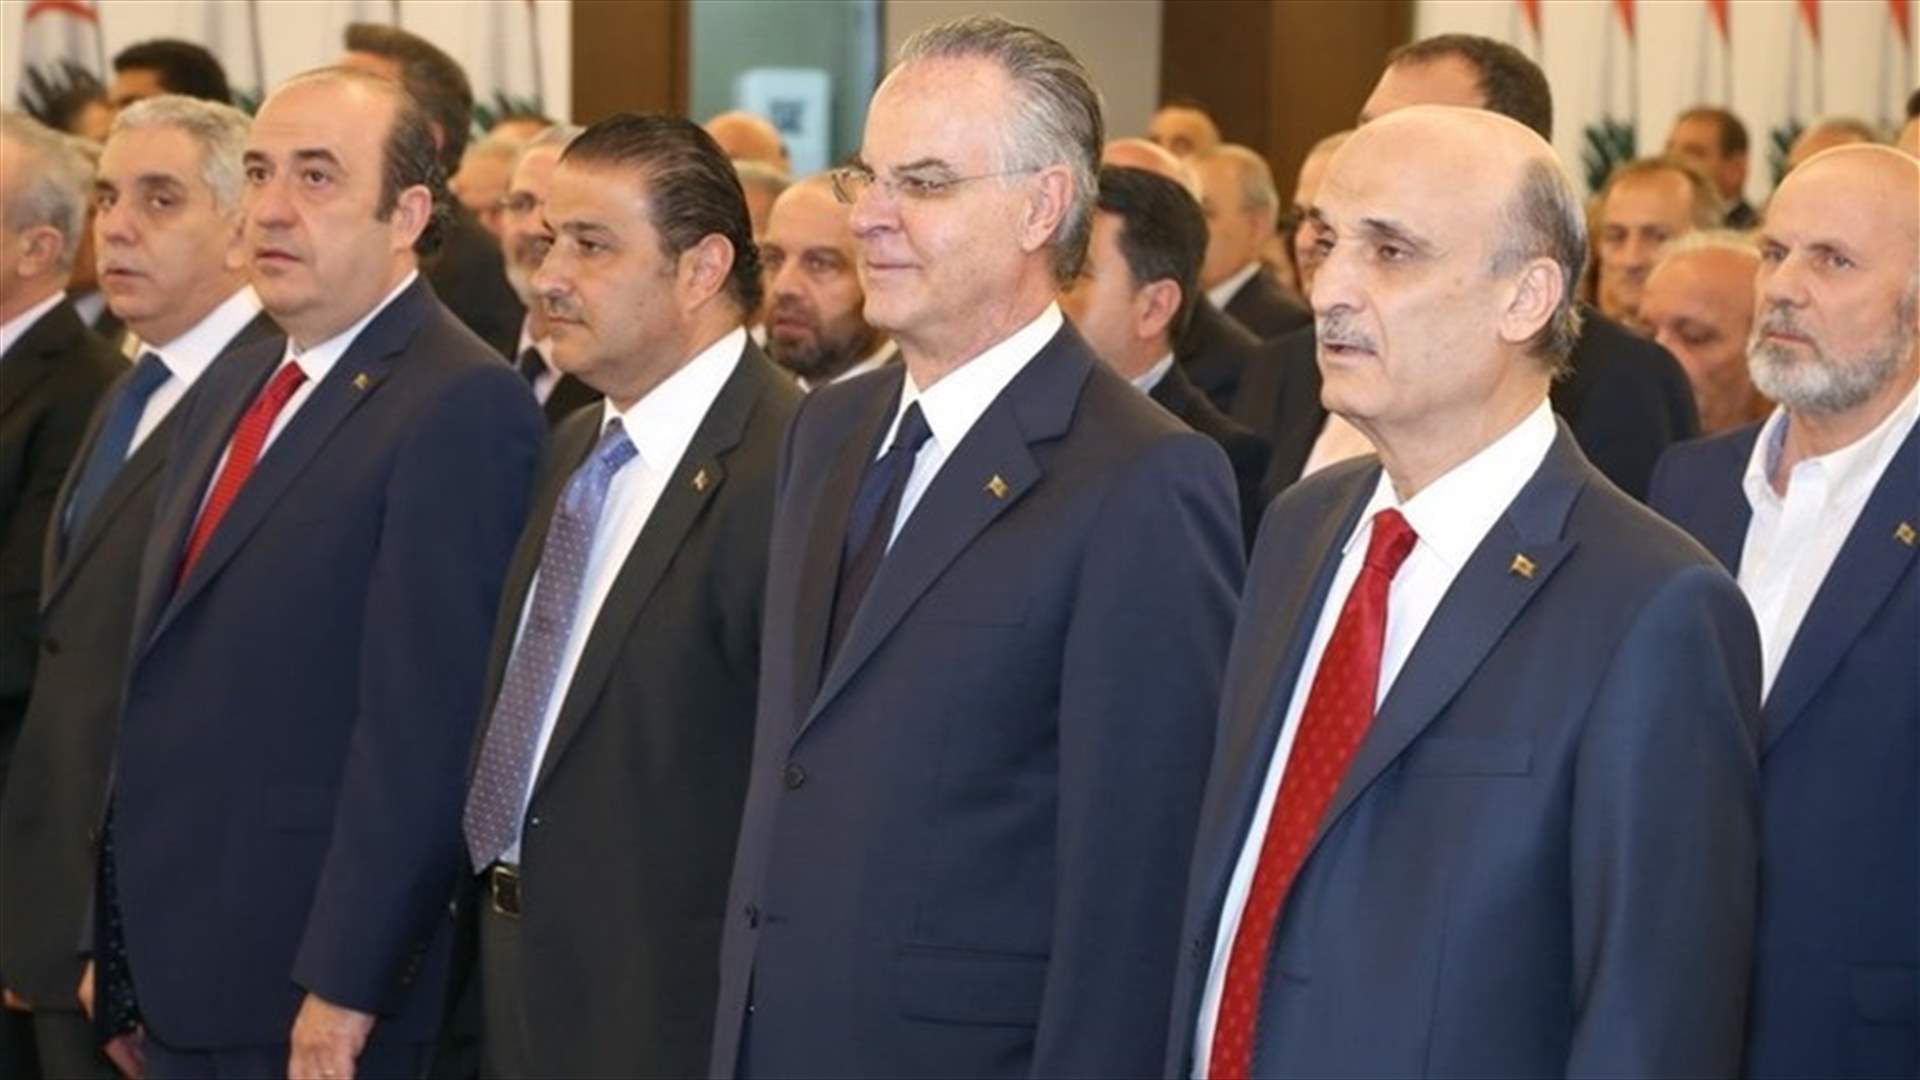 Geagea says Lebanese Forces is the spearhead of March 14